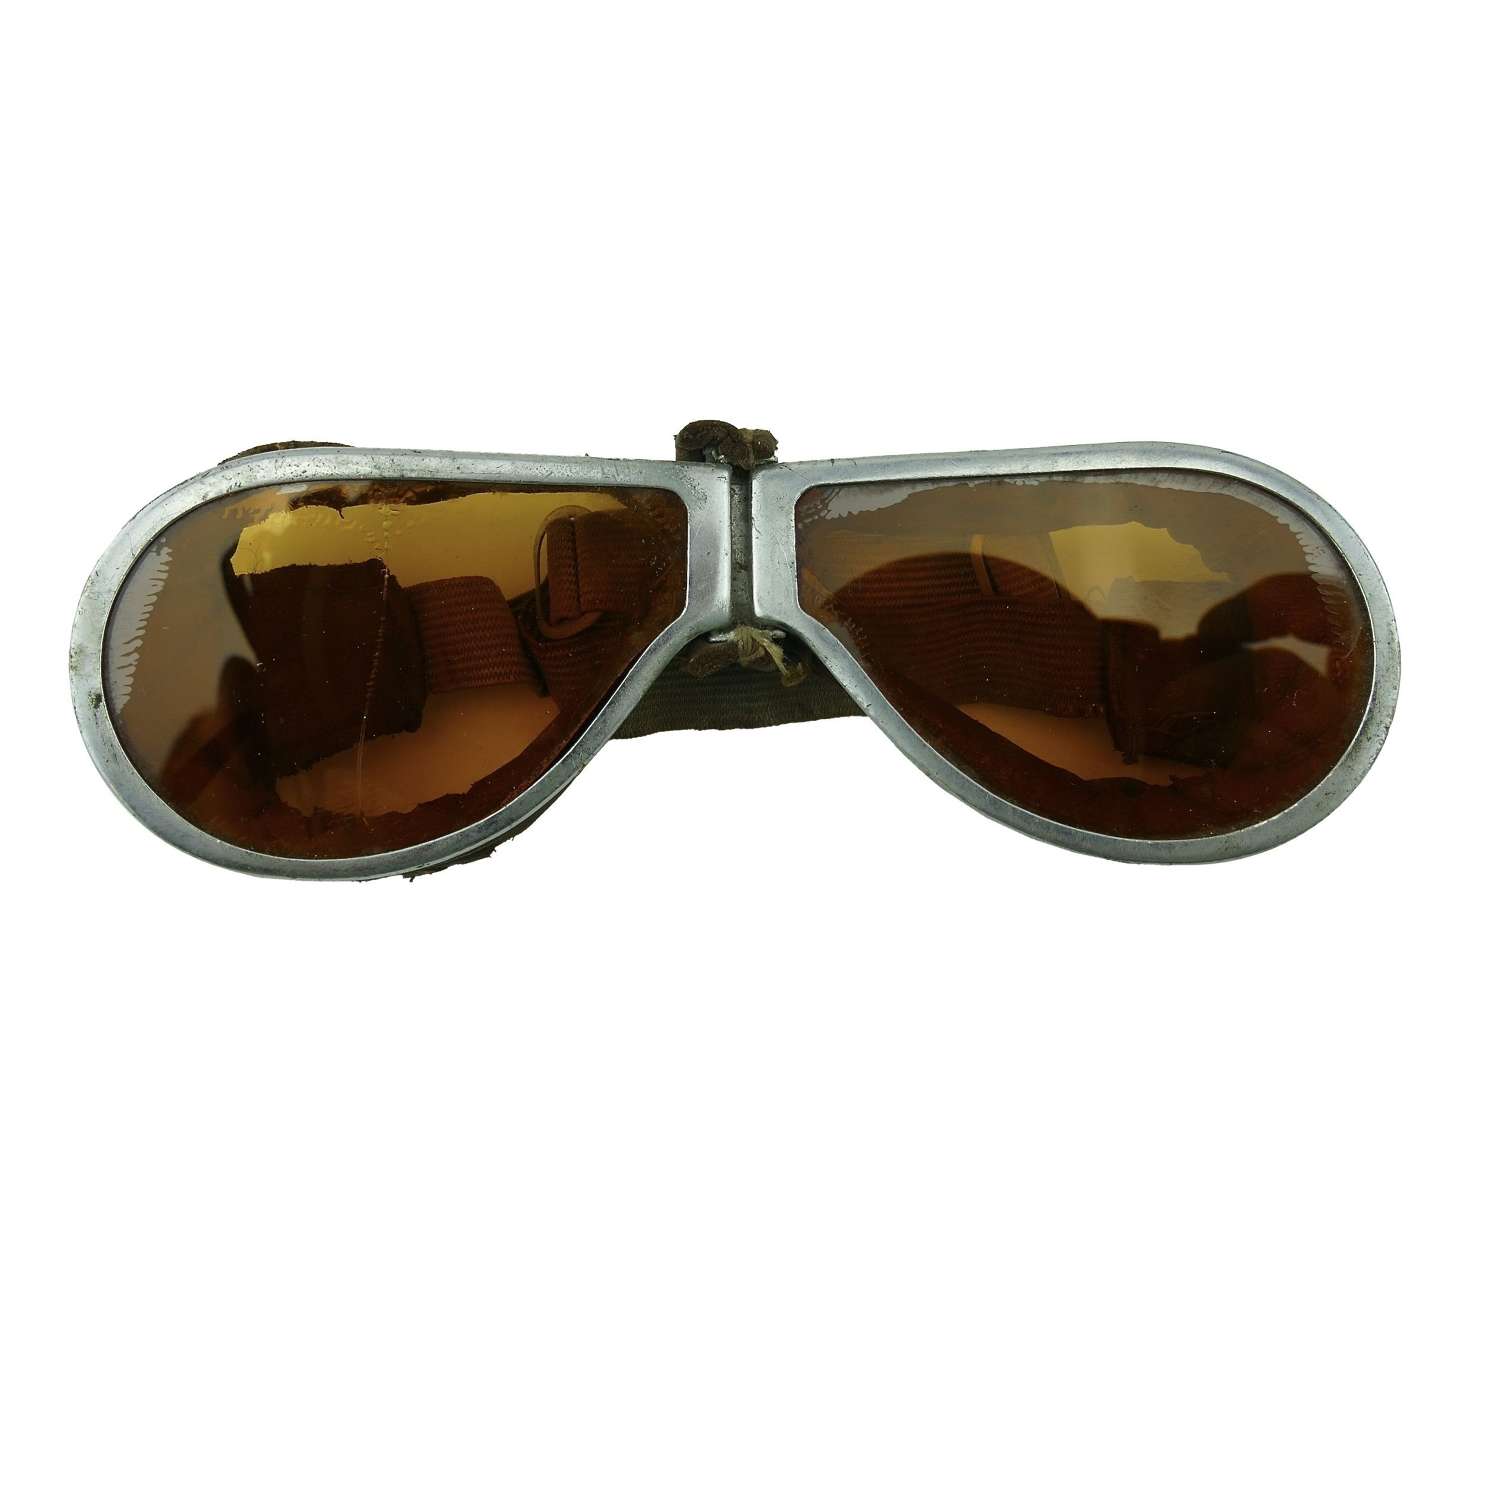 British Forces MT drivers' goggles, cased